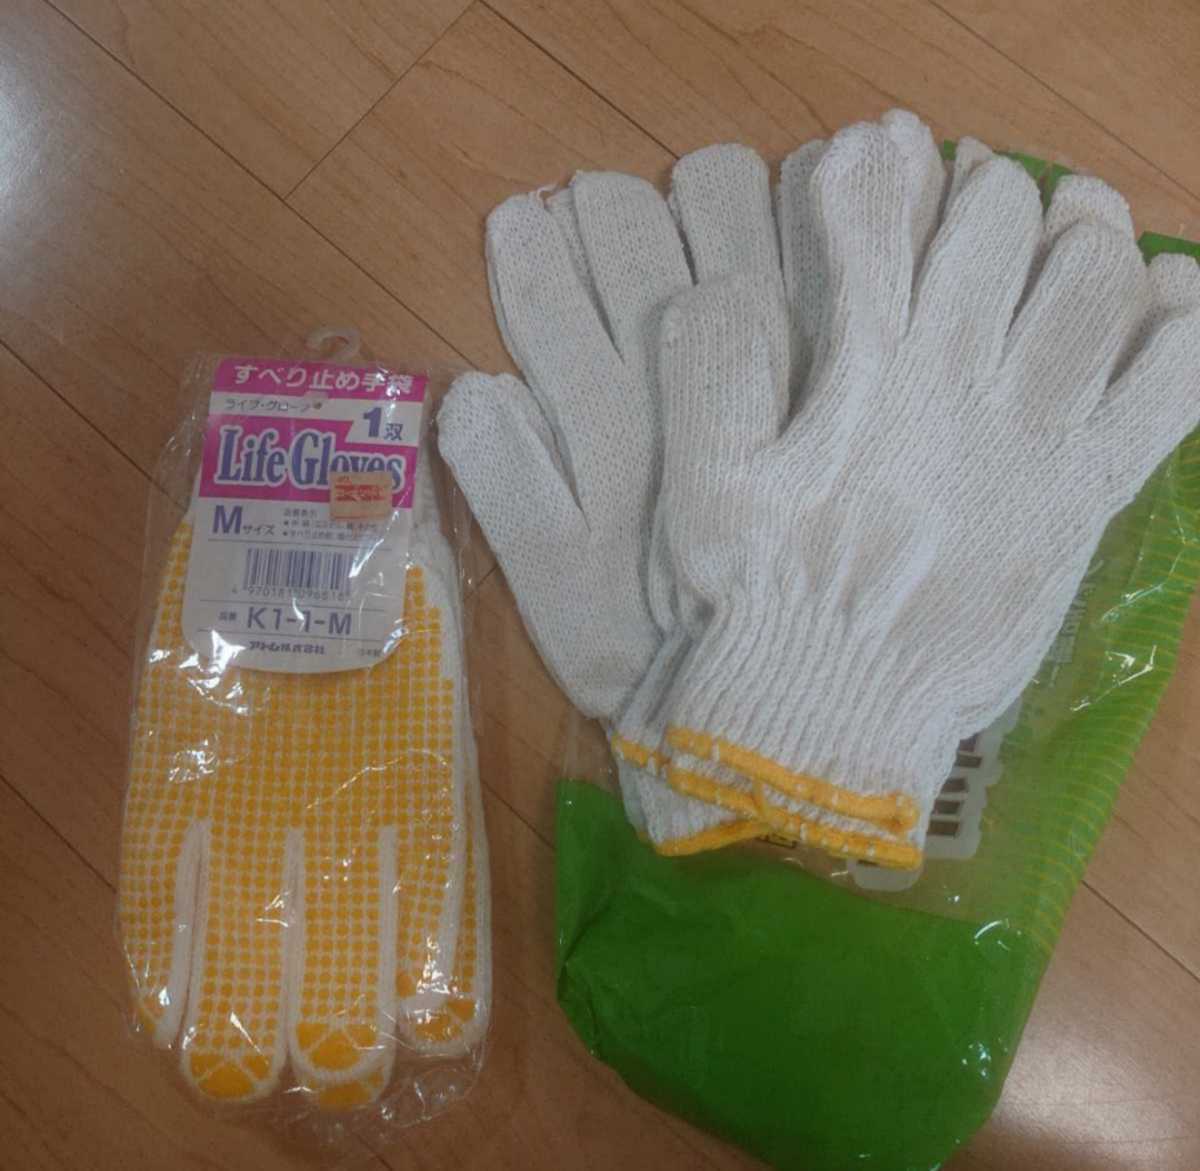  army hand 3 person minute slip prevention gloves 1.. work for gloves 2.